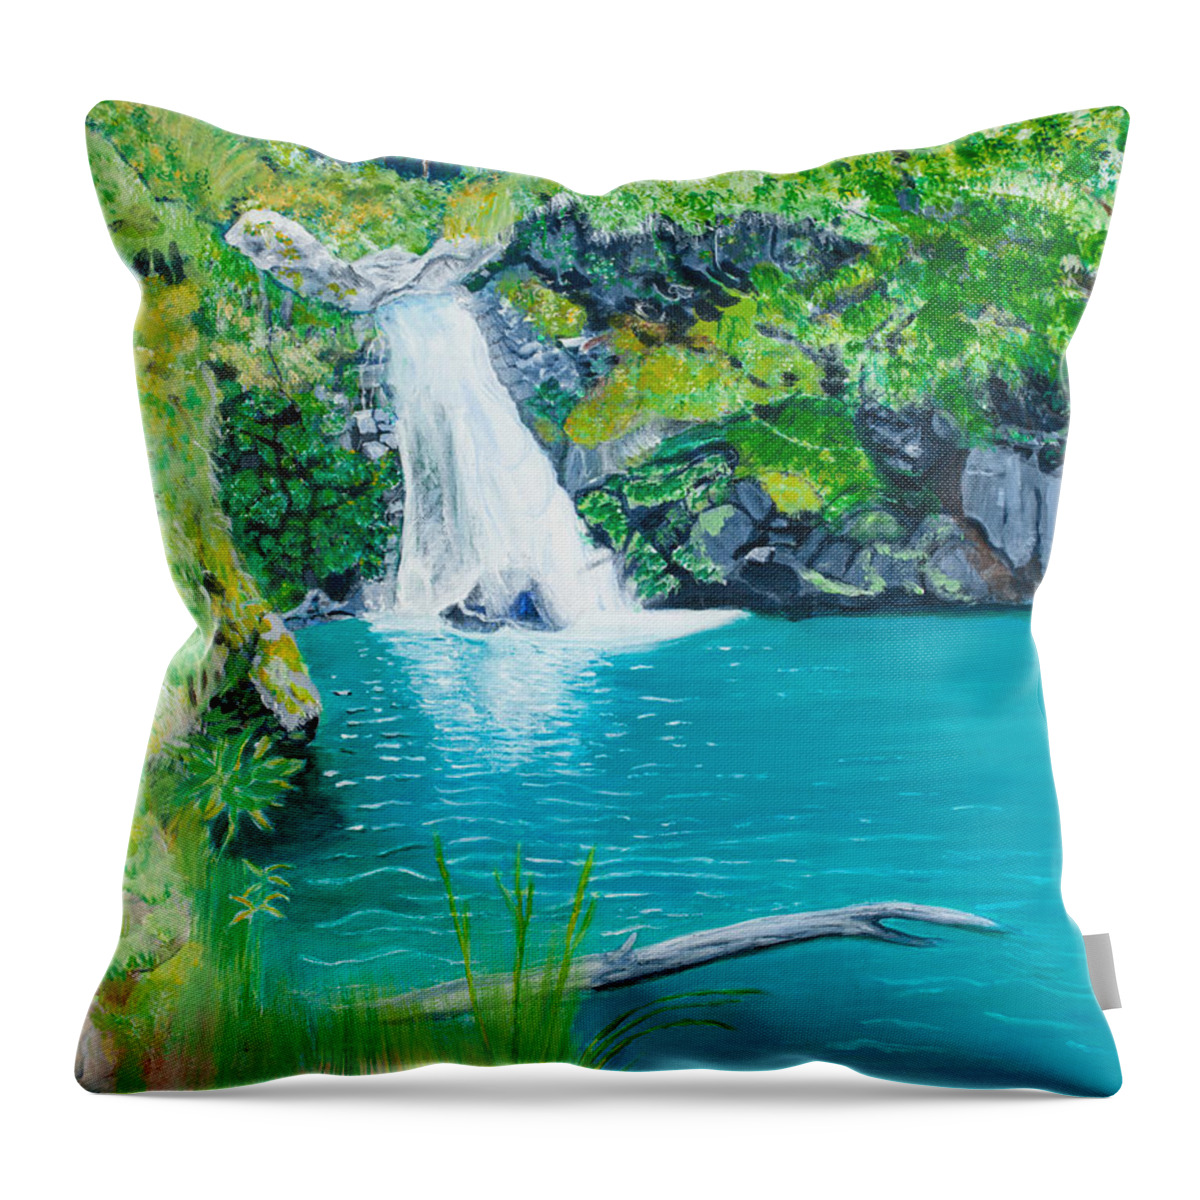 Waterfall Pool Hawaii Nature Landscape Peaceful Throw Pillow featuring the painting Water Fall Pool 18x24 by Santana Star